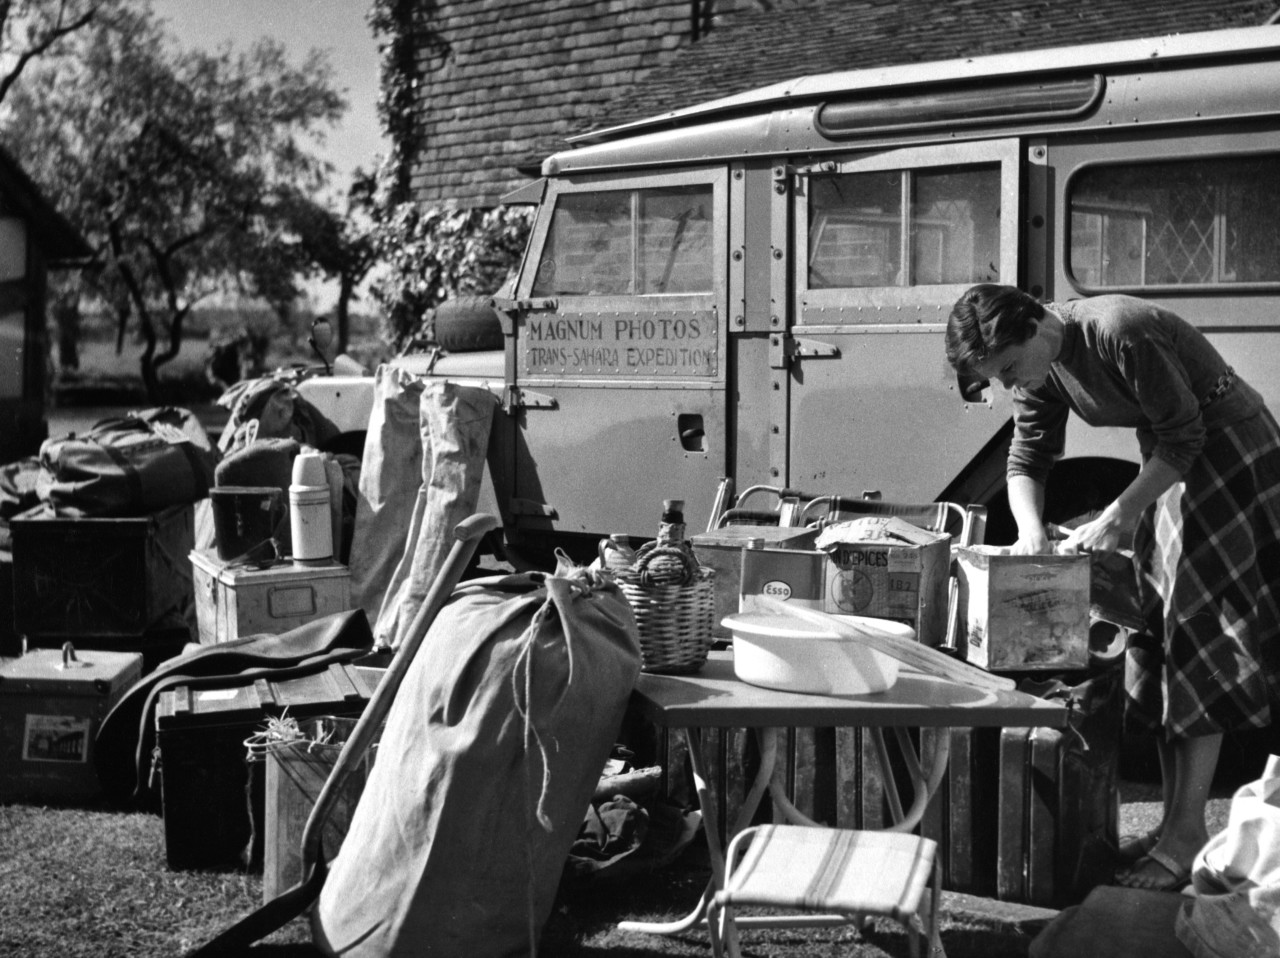 GB. England. Kent. 1957. Jinx Rodger preparing the Land Rover for the Trans-Sahara Expedition.